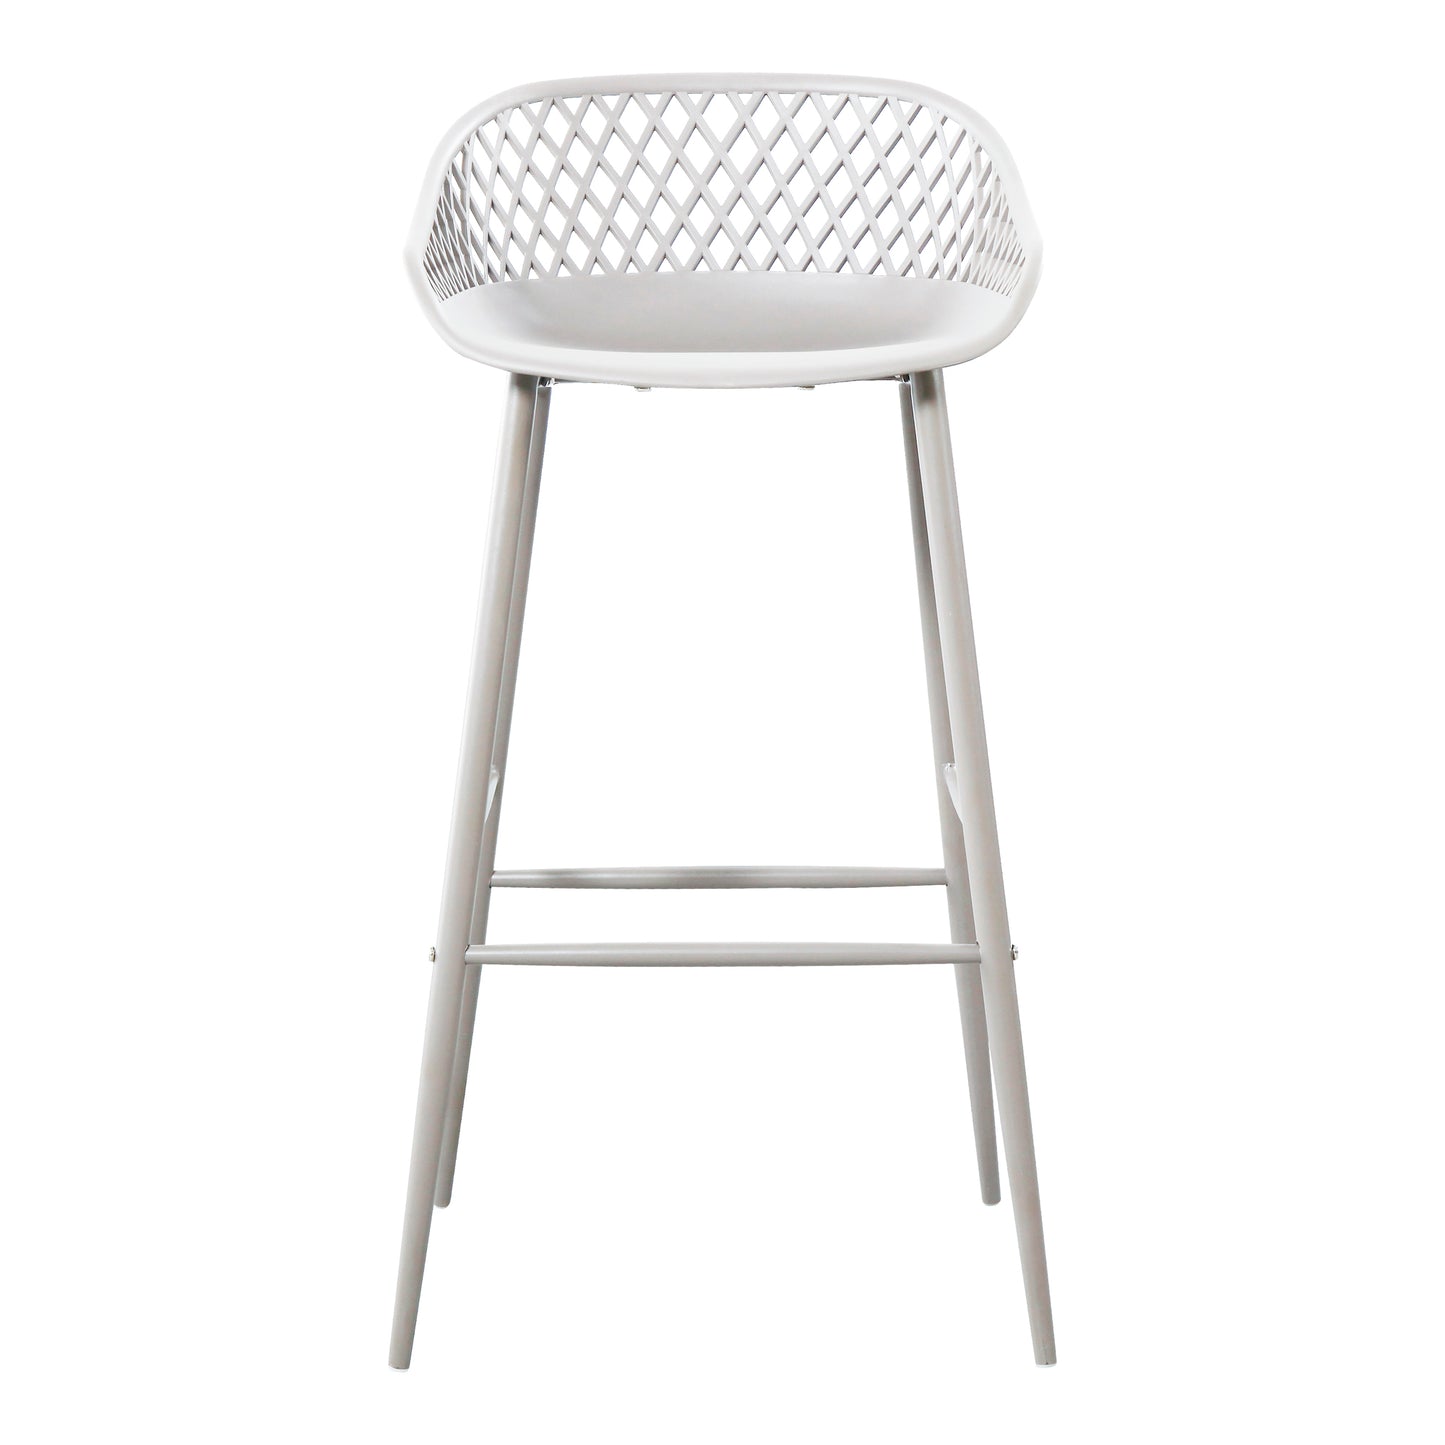 Piazza Outdoor Barstool White Set of 2